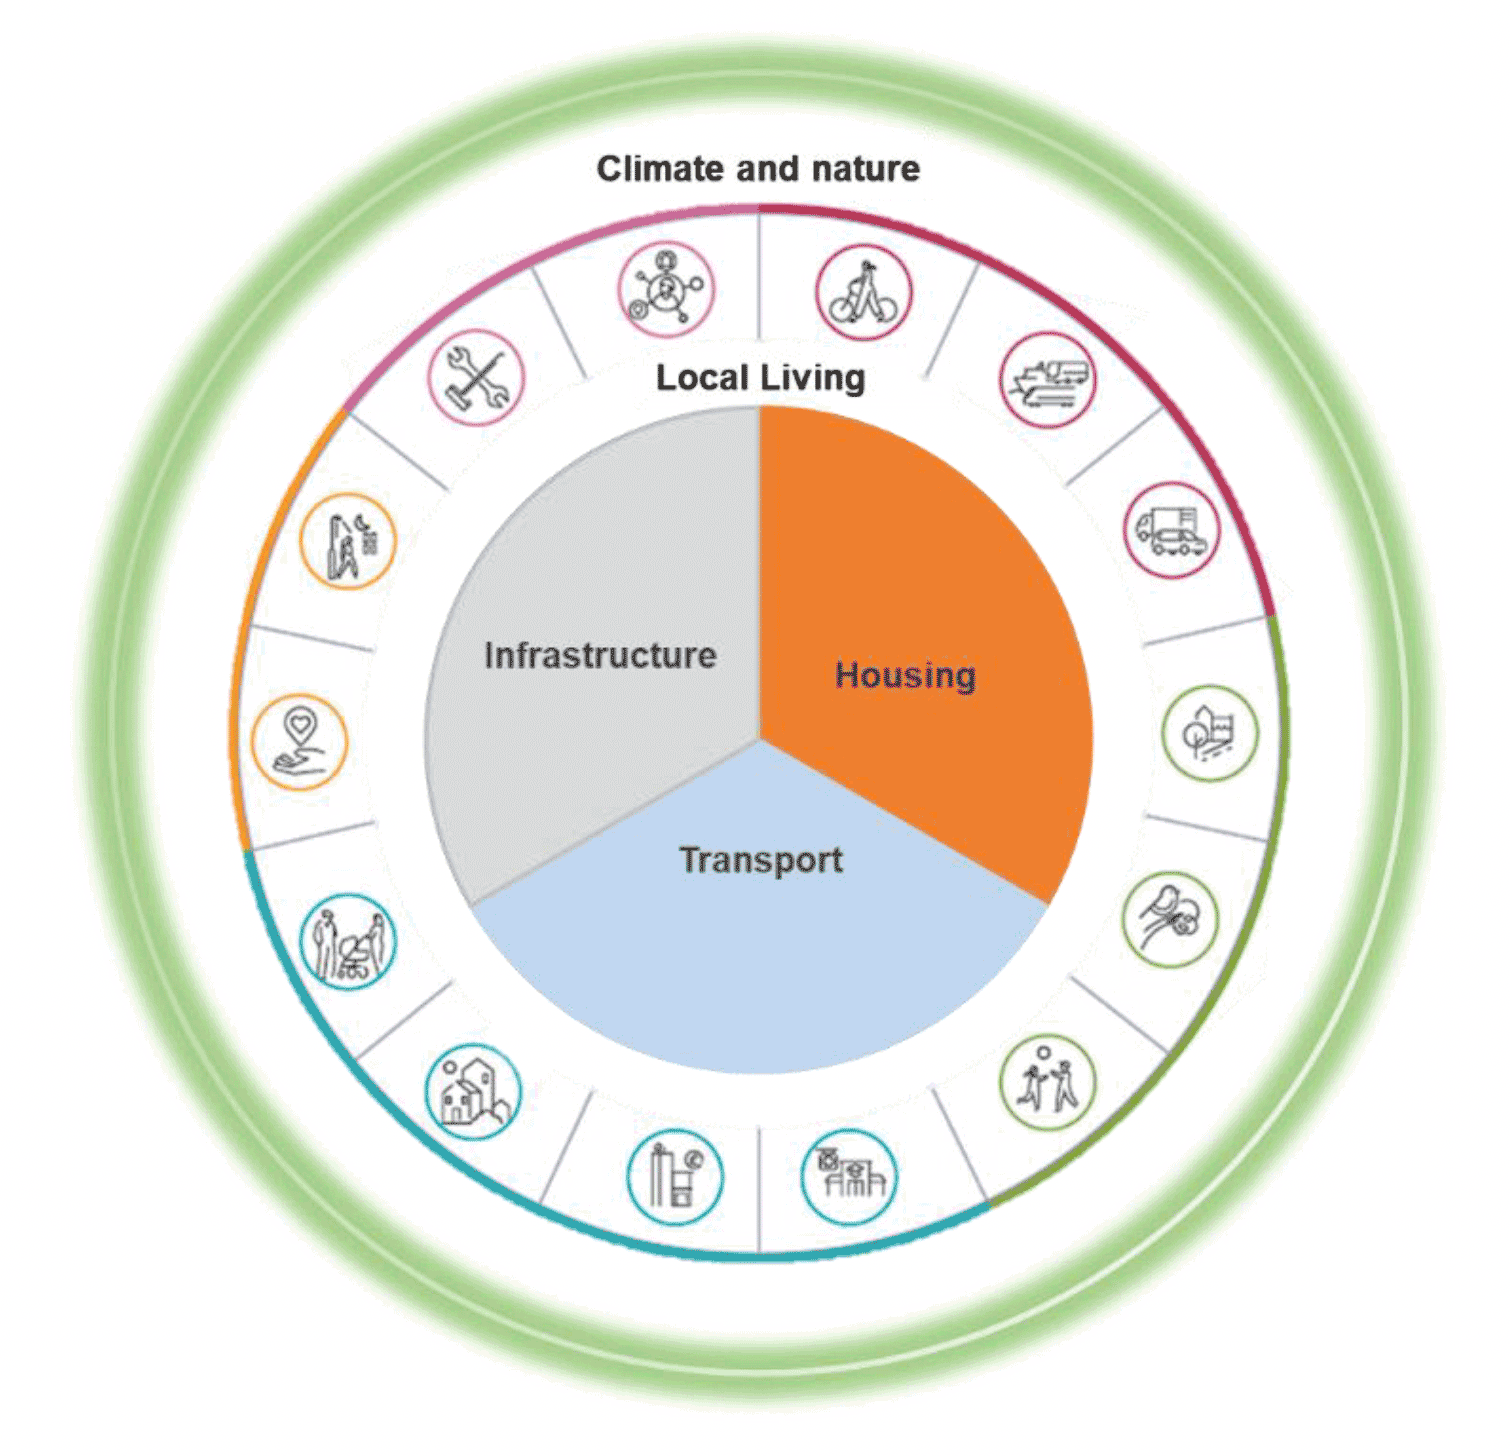 Circular diagram including headings on climate and nature, local living, infrastructure, housing and transport.